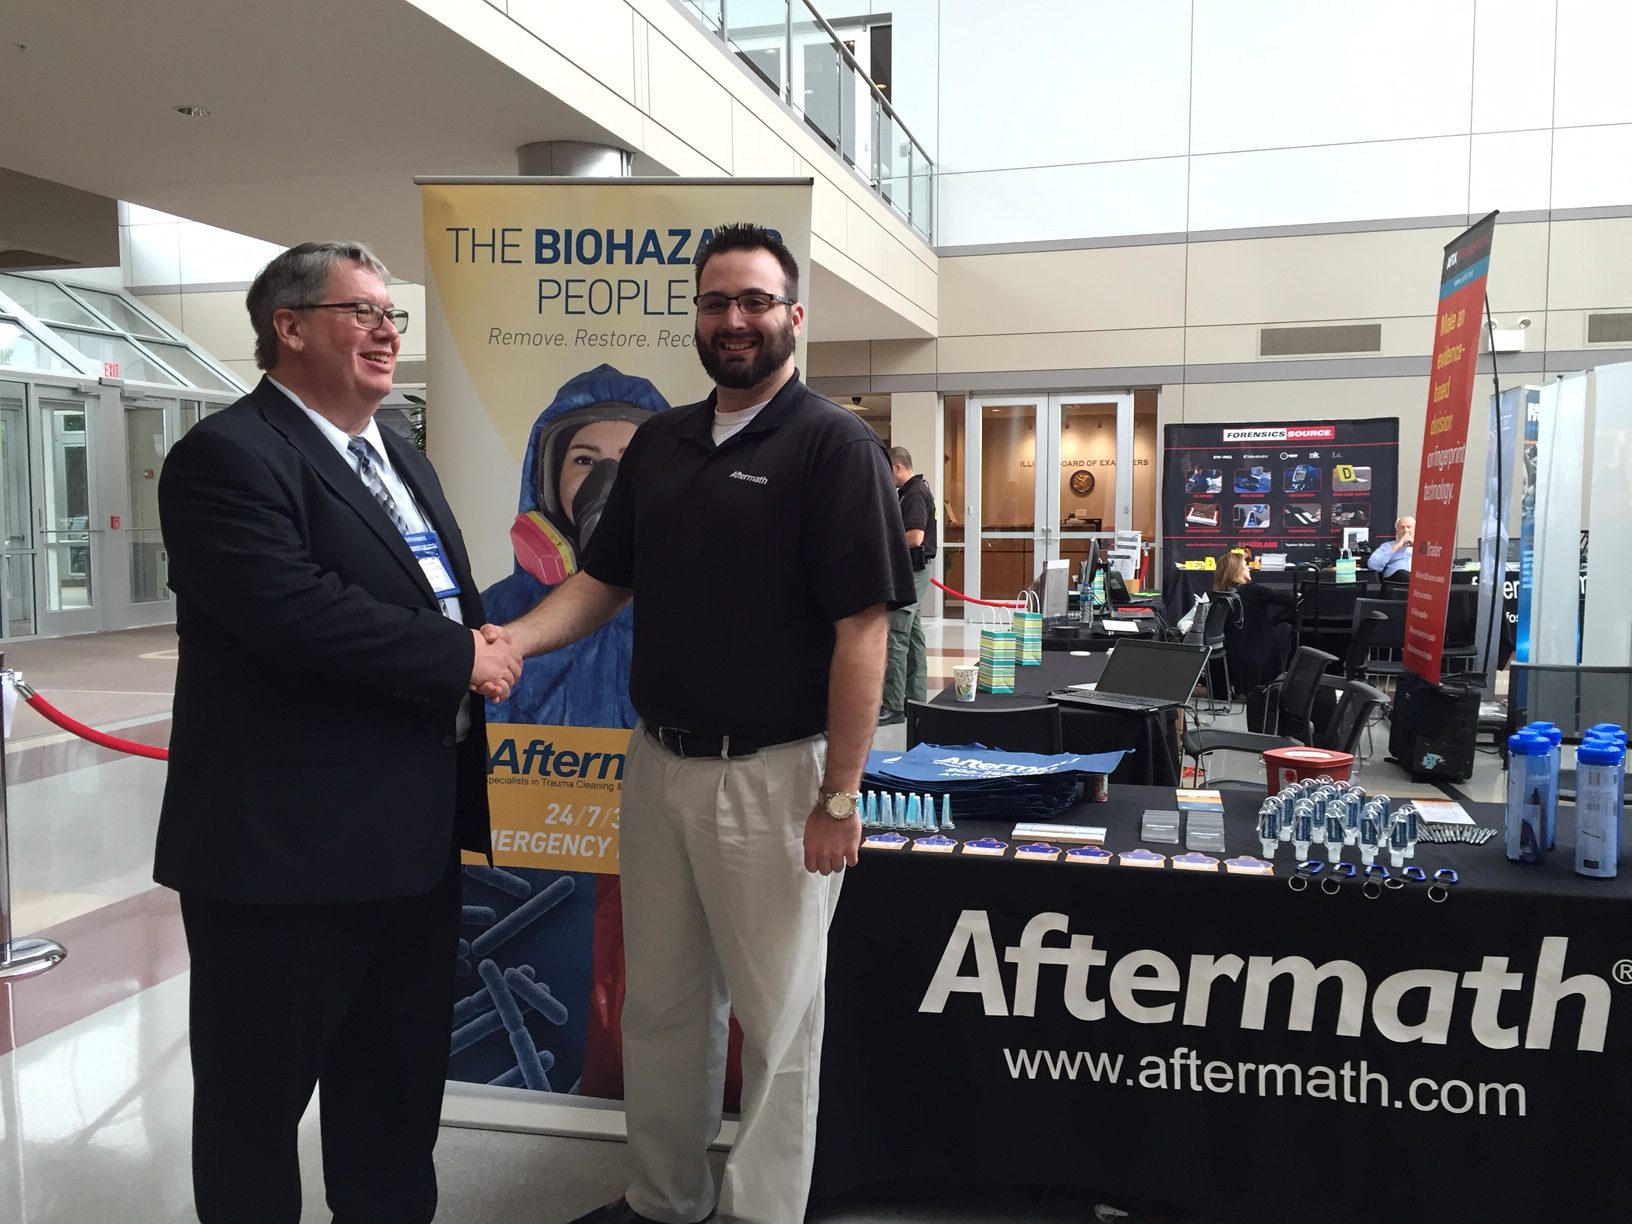 Aftermath visits the 2016 IDIAI Conf.